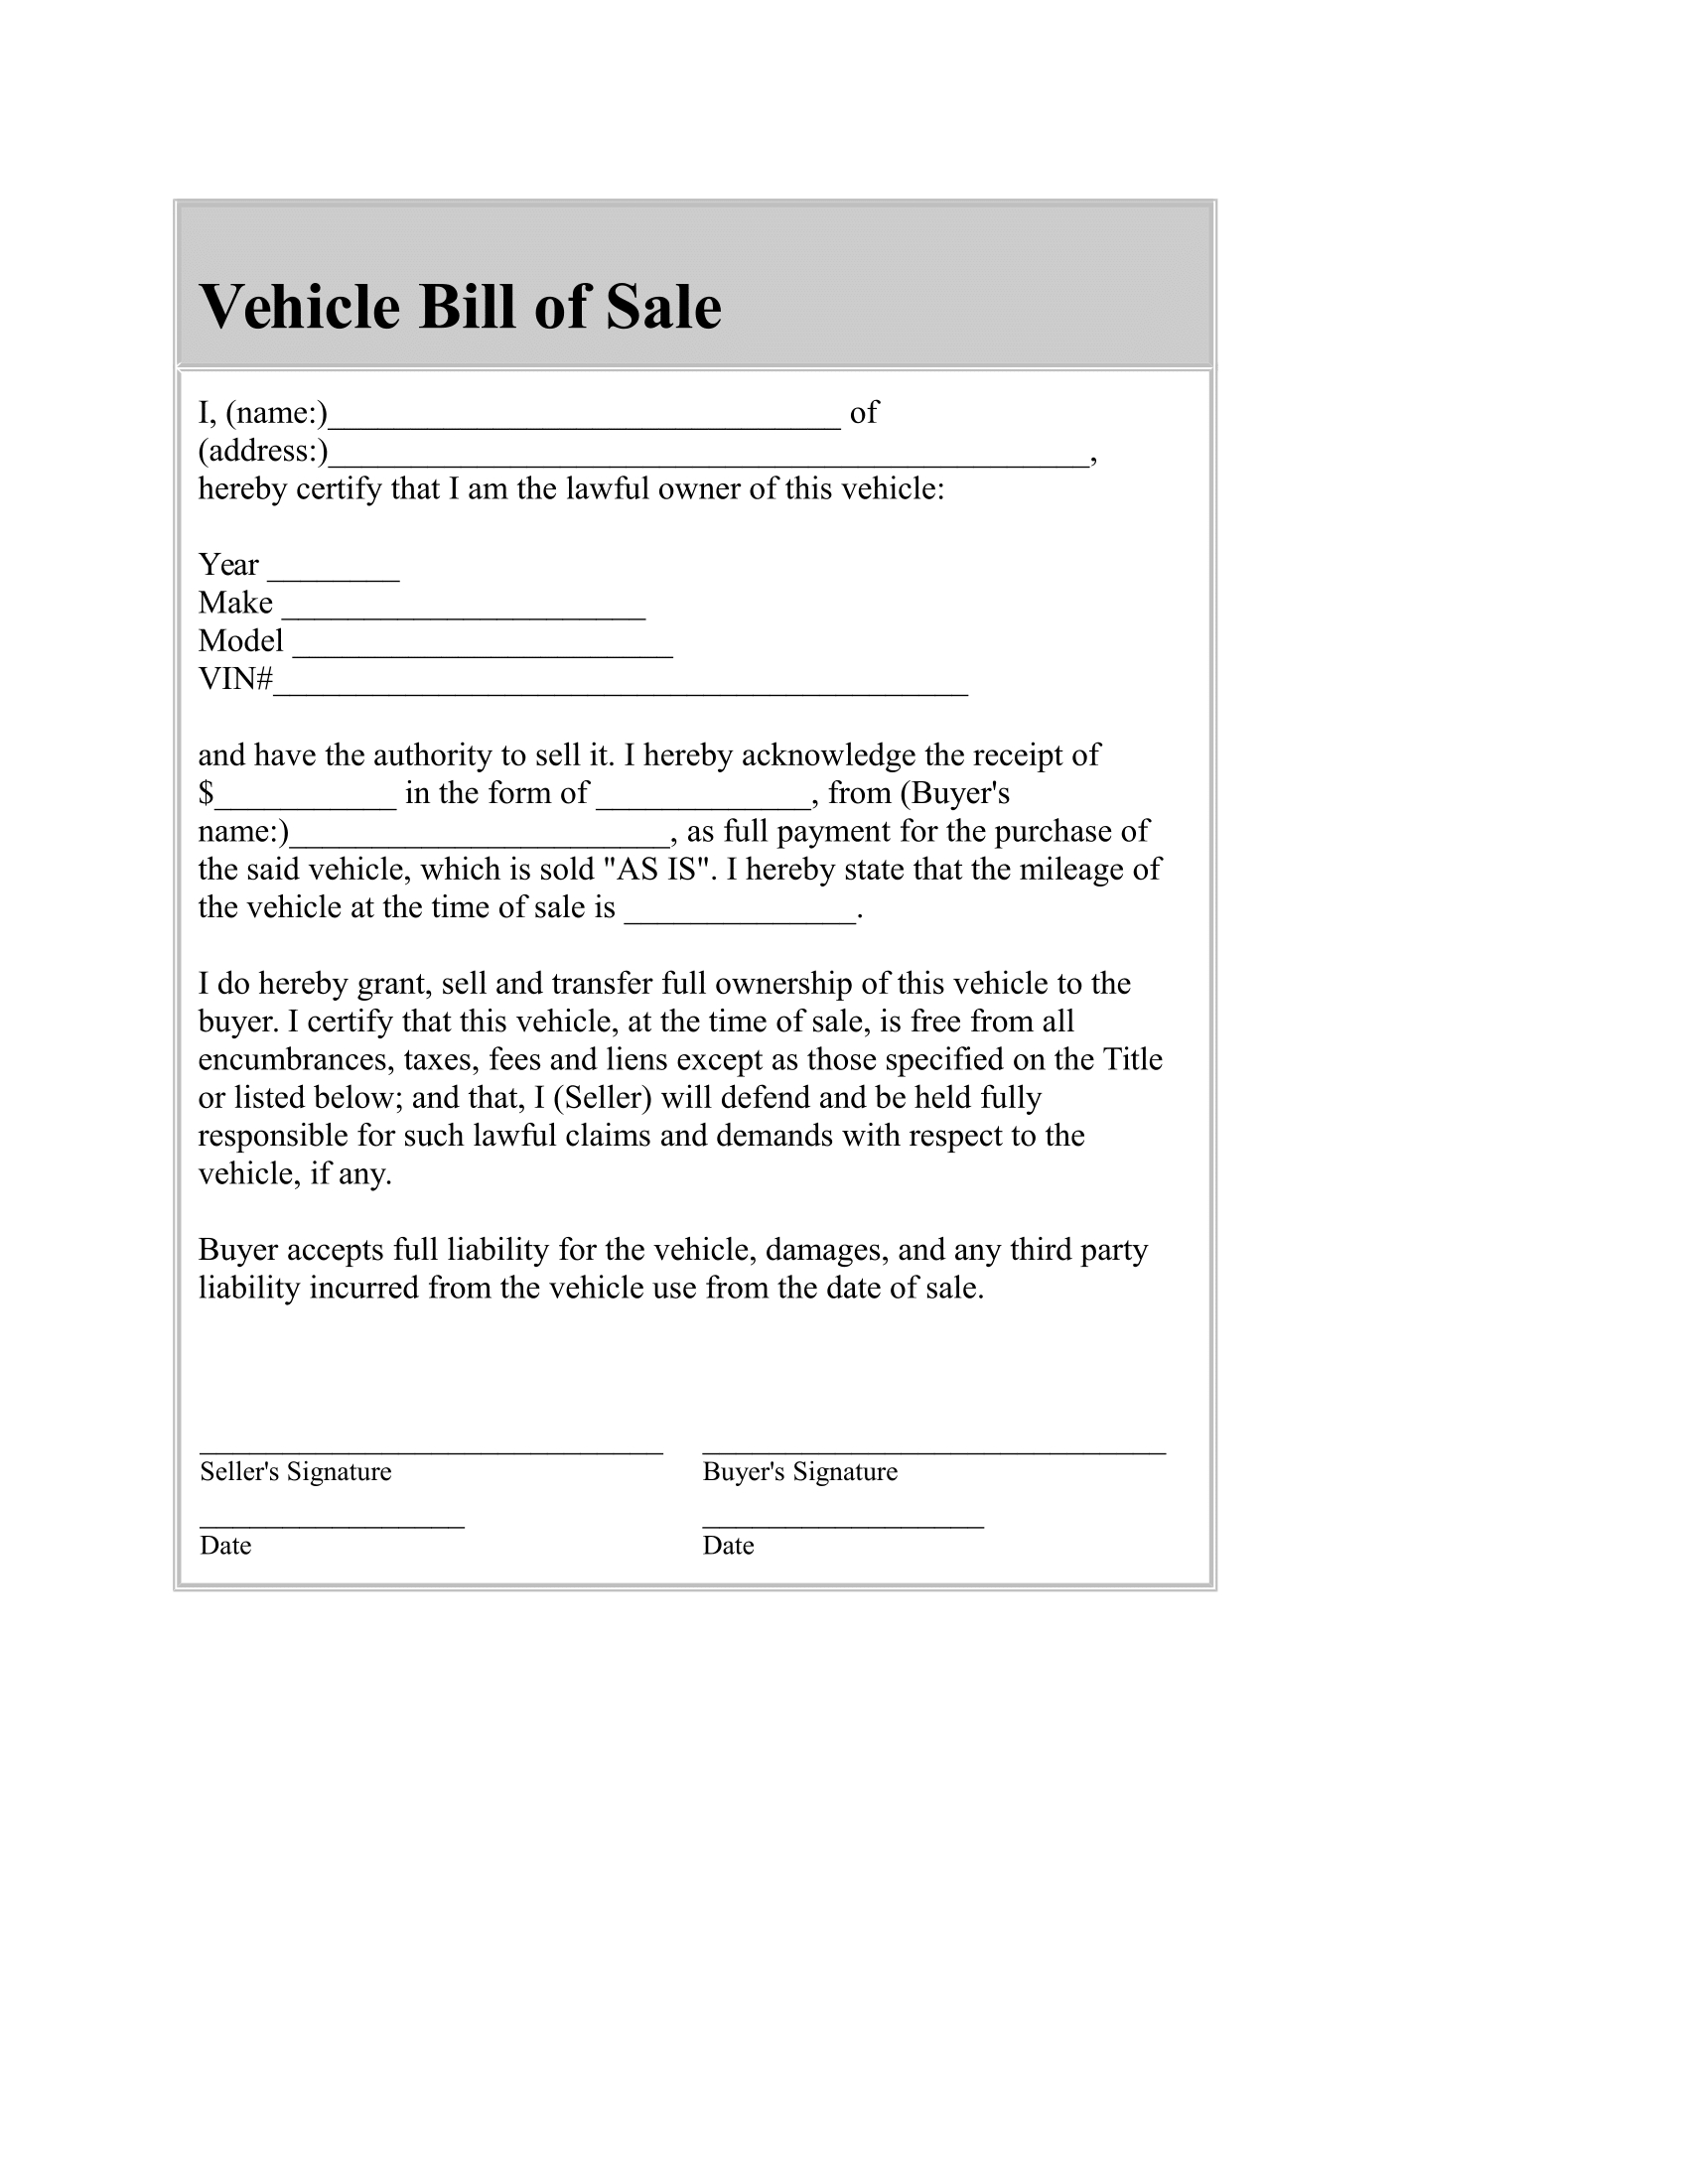 019 Vehicle Bill Of Sale Template Word Car Free Download Pdf With Regard To Vehicle Bill Of Sale Template Word